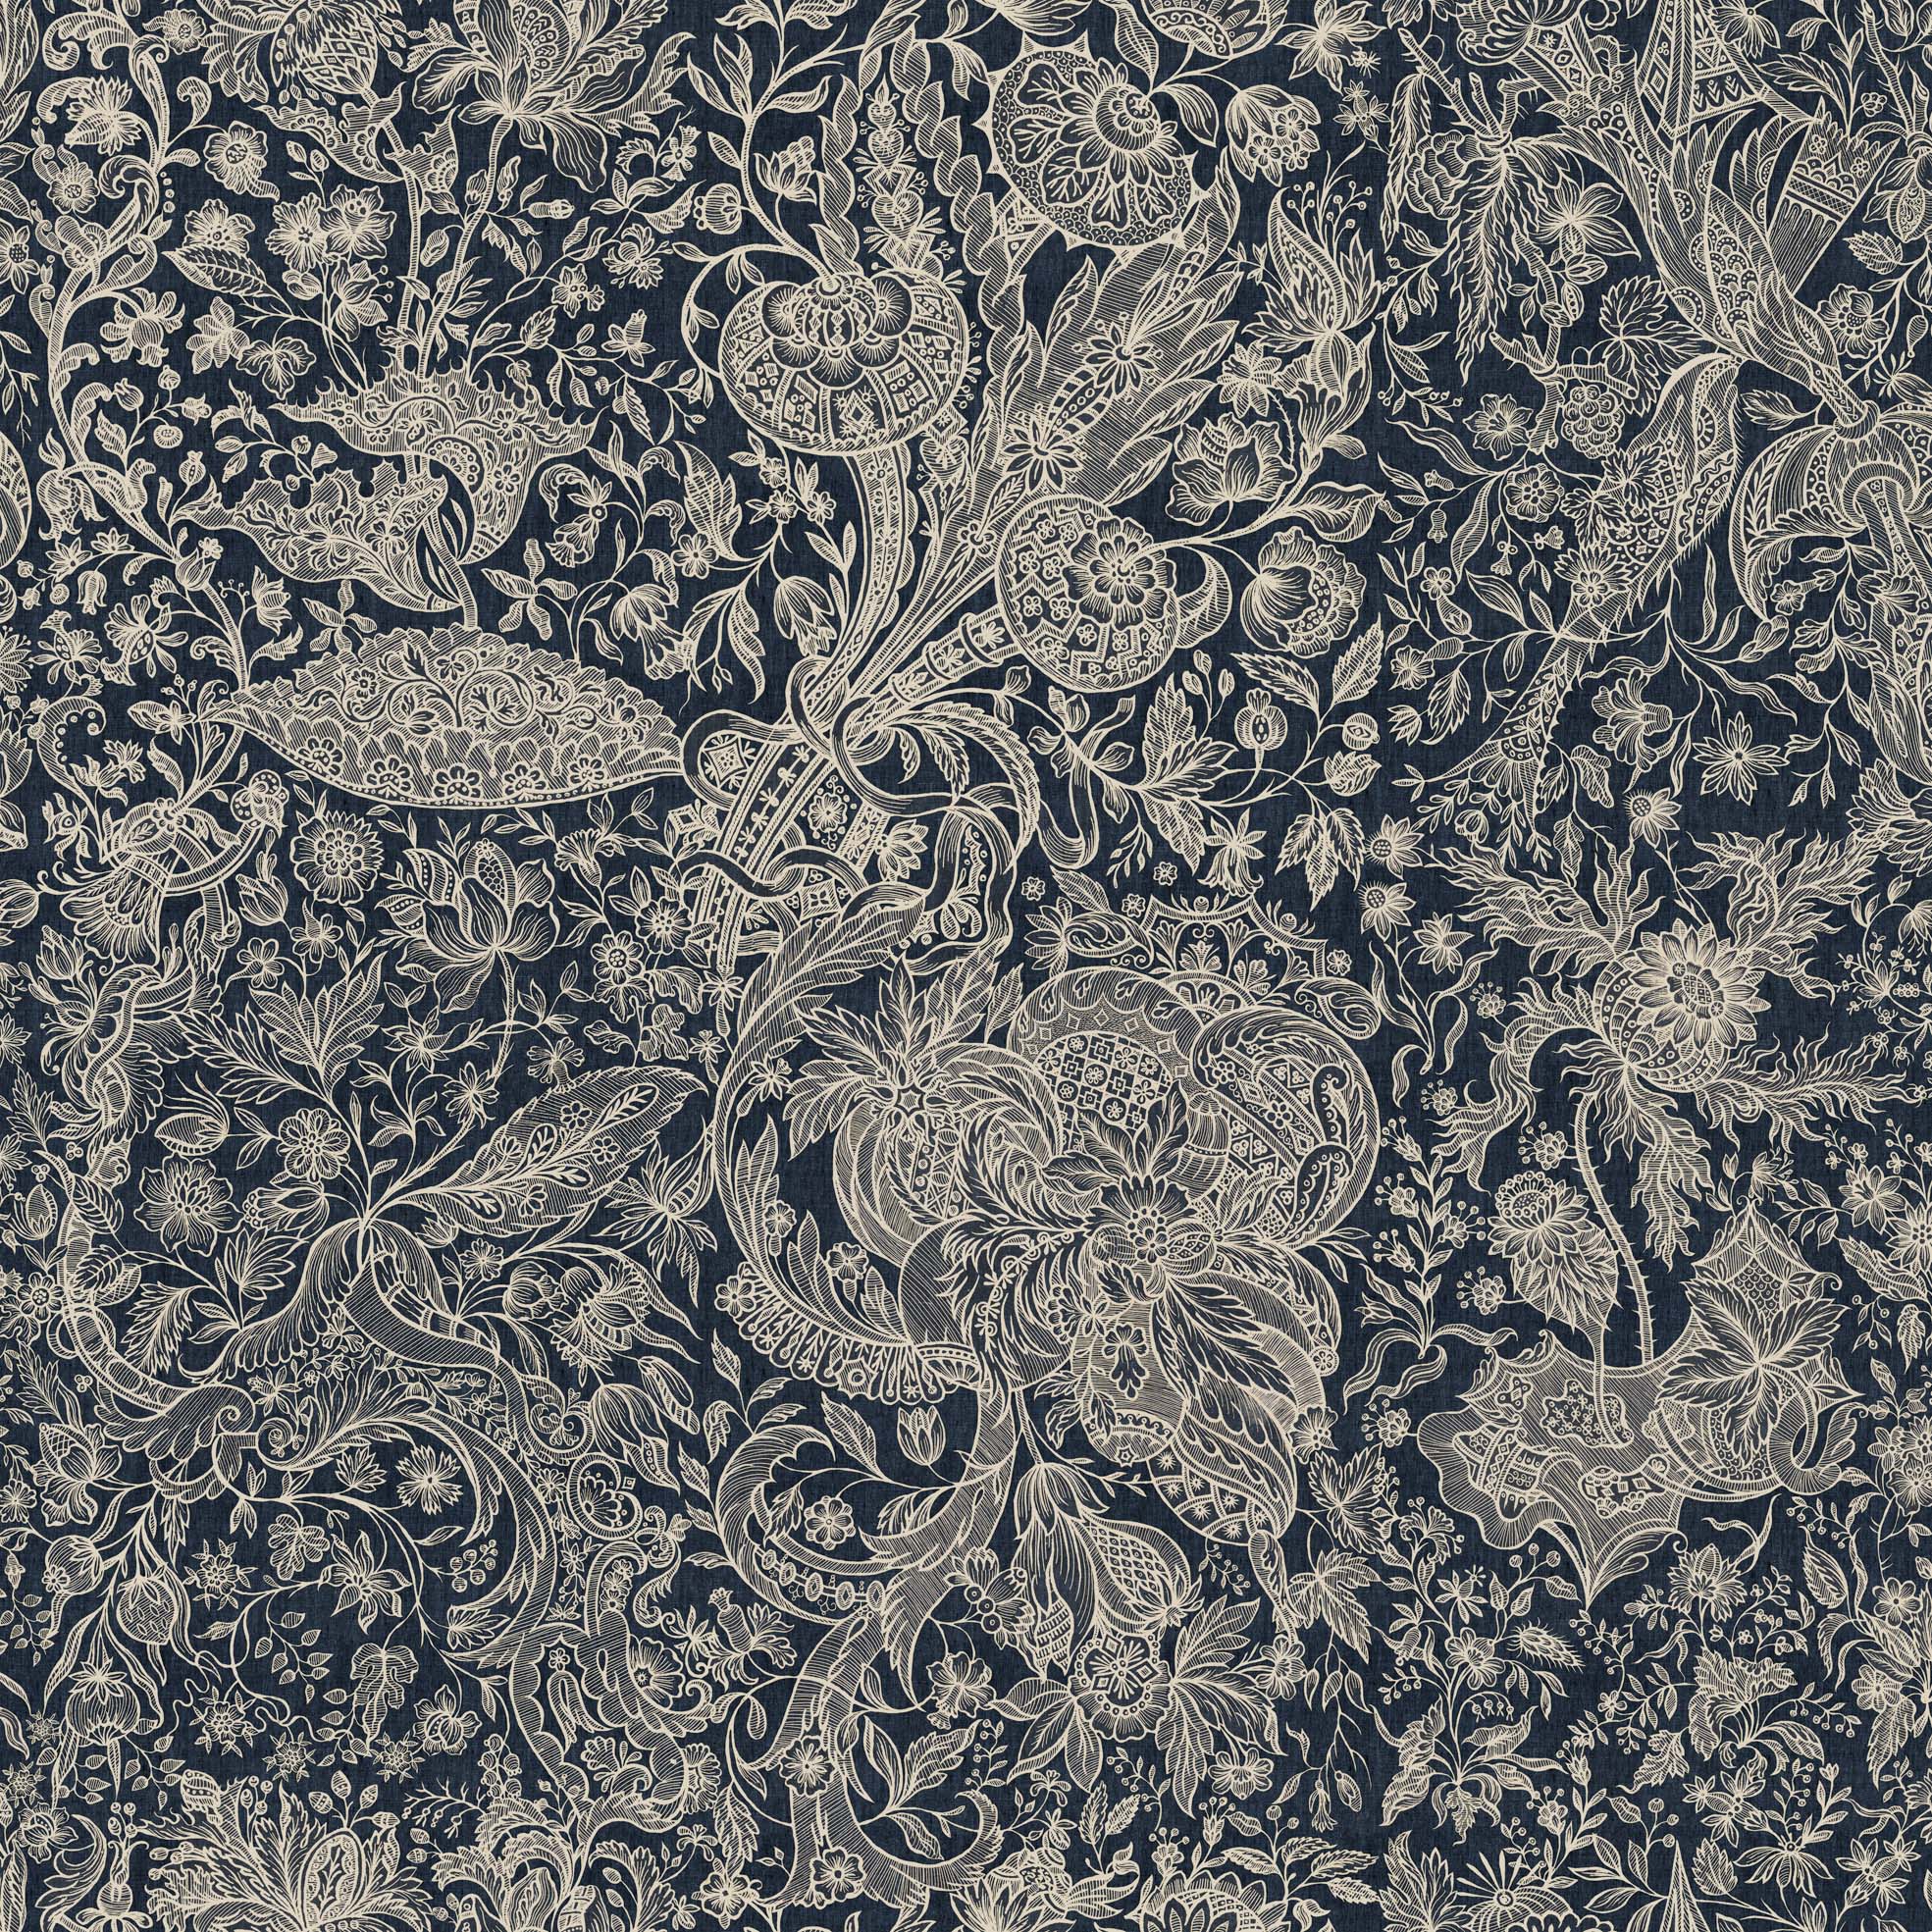 images/productimages/small/sarkozi-embroidery-indigo-52x50cm-wp30027-wallpaper.jpg